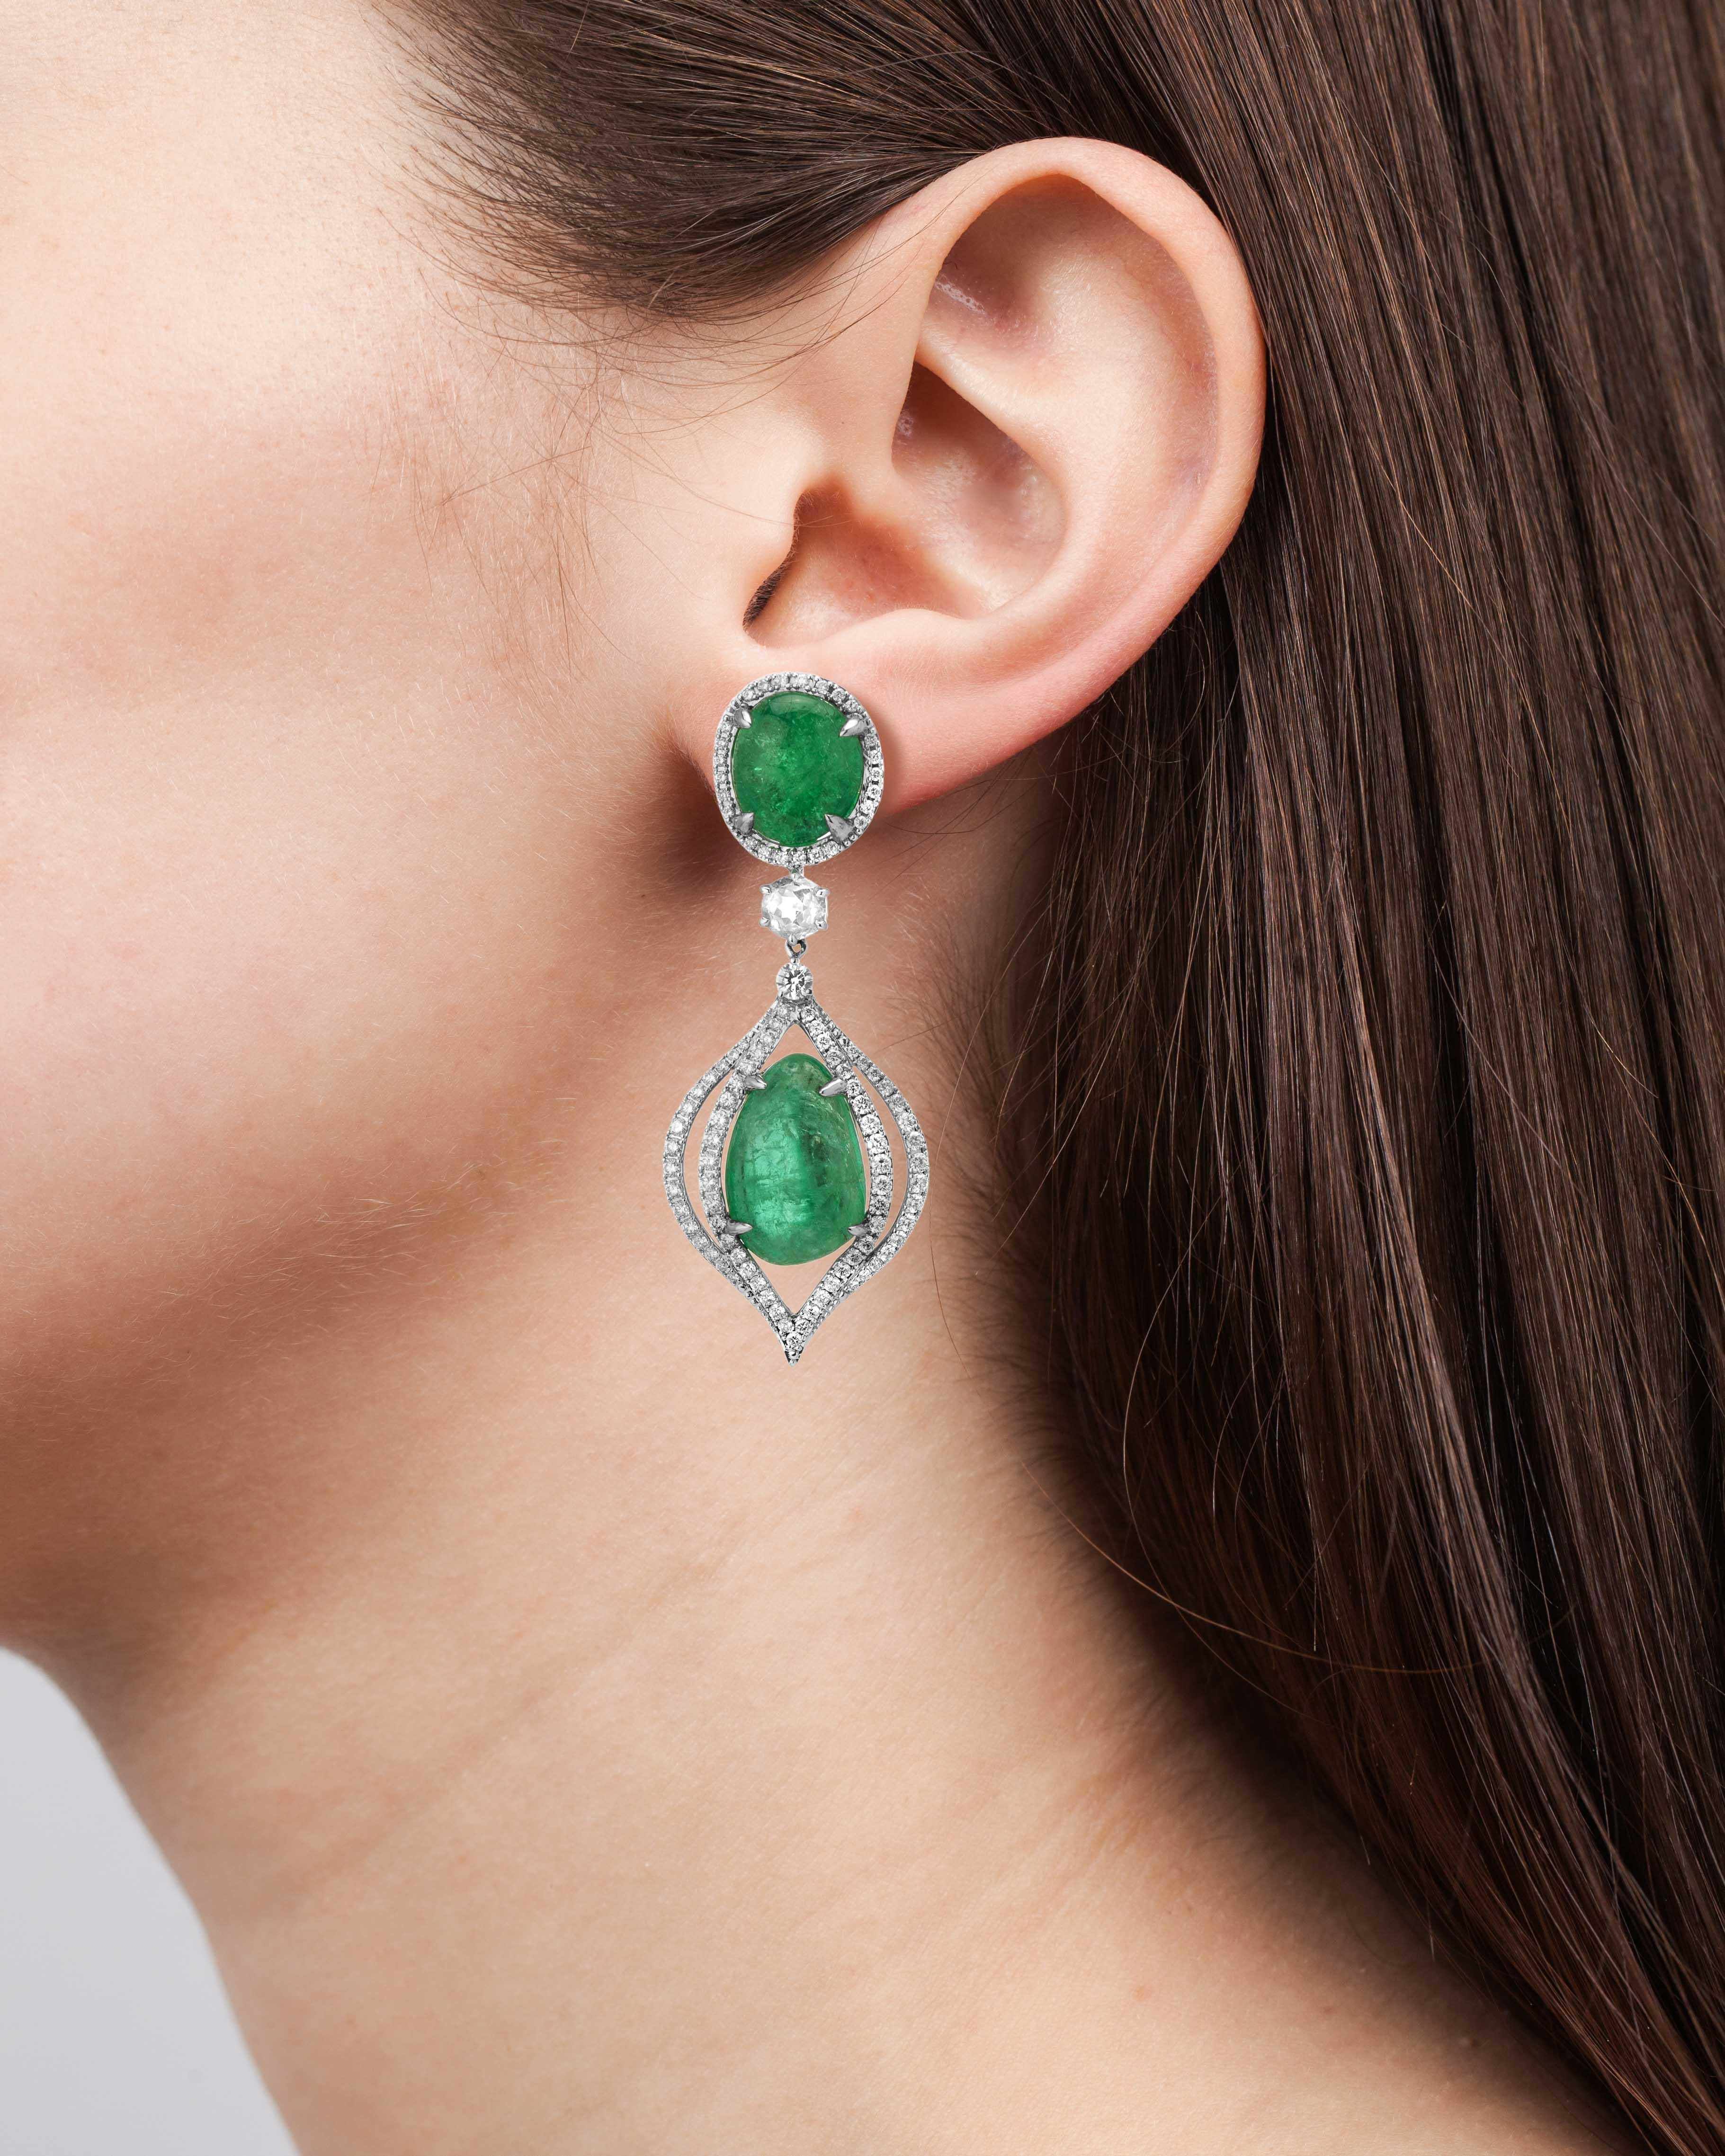 18 Karat white gold dangle earrings set with organic tumbled Muzo emeralds of 36.56 carats and 2.81 carats of round brilliant diamond pave.

Muzo Emerald Colombia Heritage Verity Earrings set with 36.56 carats Emerald.

Verity is a tribute to the